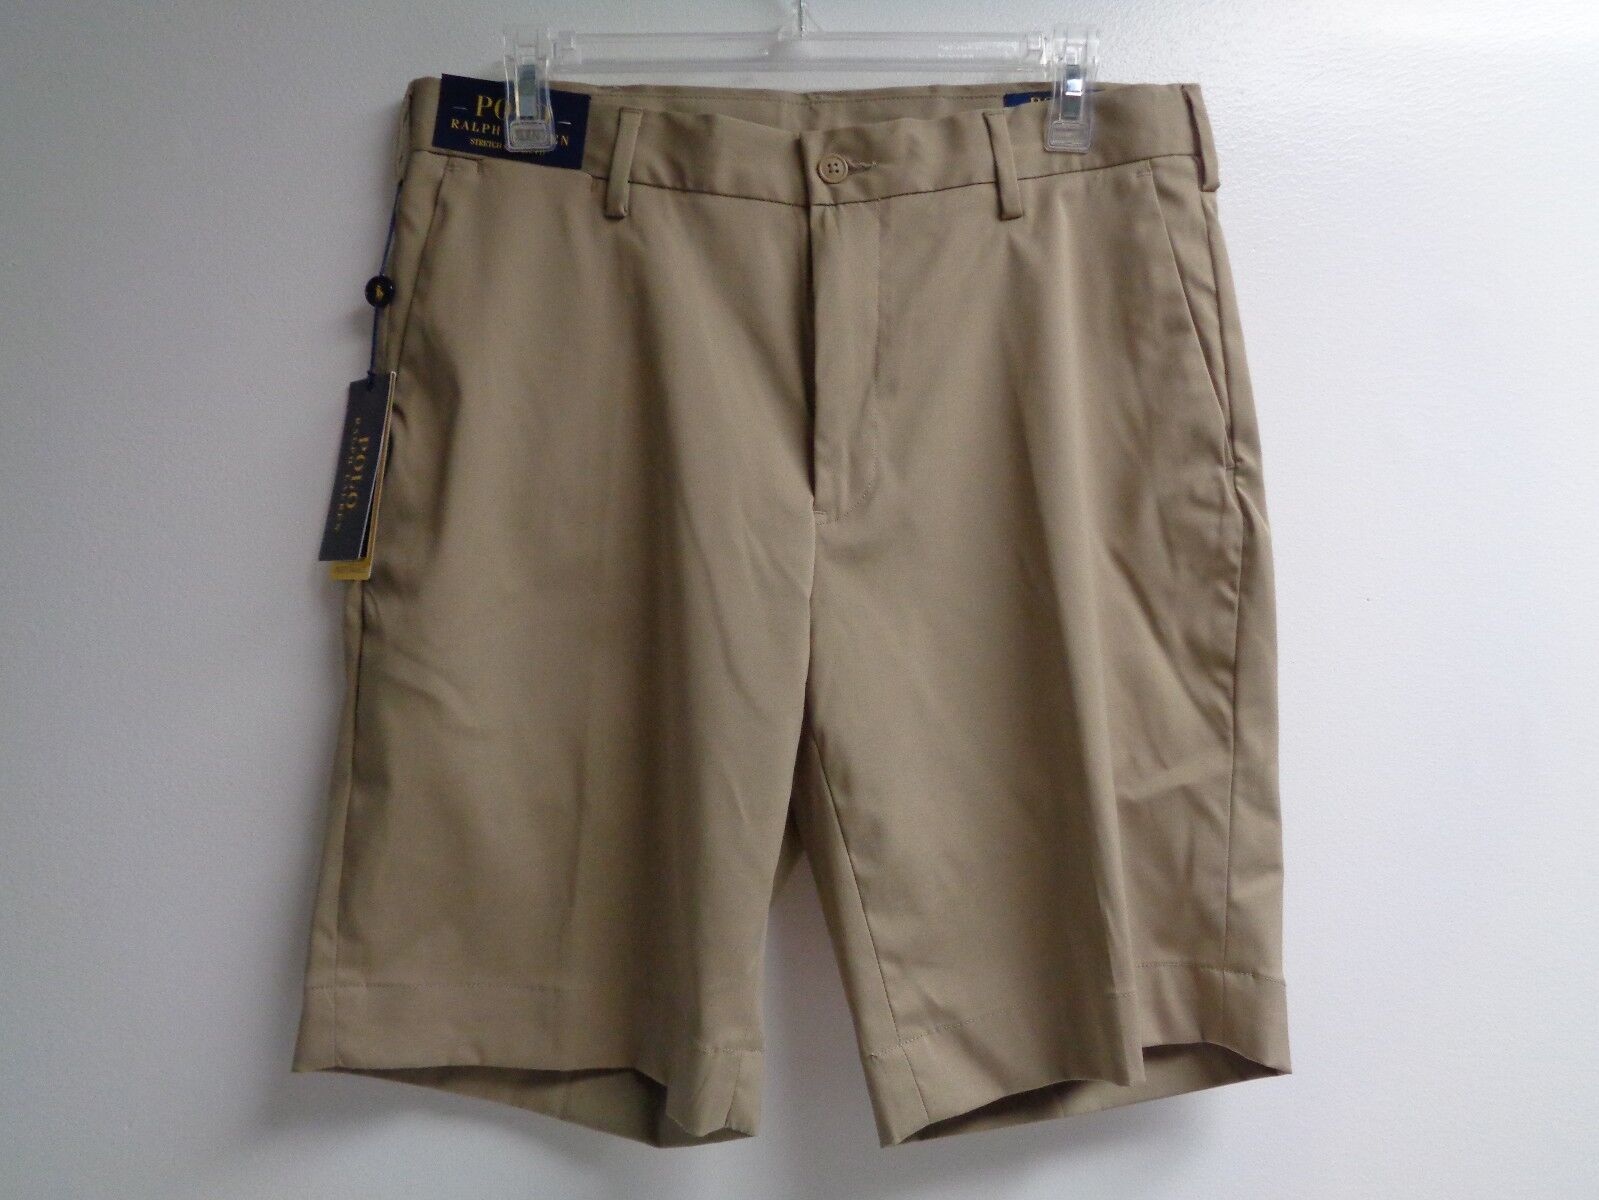 Primary image for Polo Ralph Lauren Size 30W STRETCH CLASSIC FIT M CLASSICS Khaki New Men's Shorts